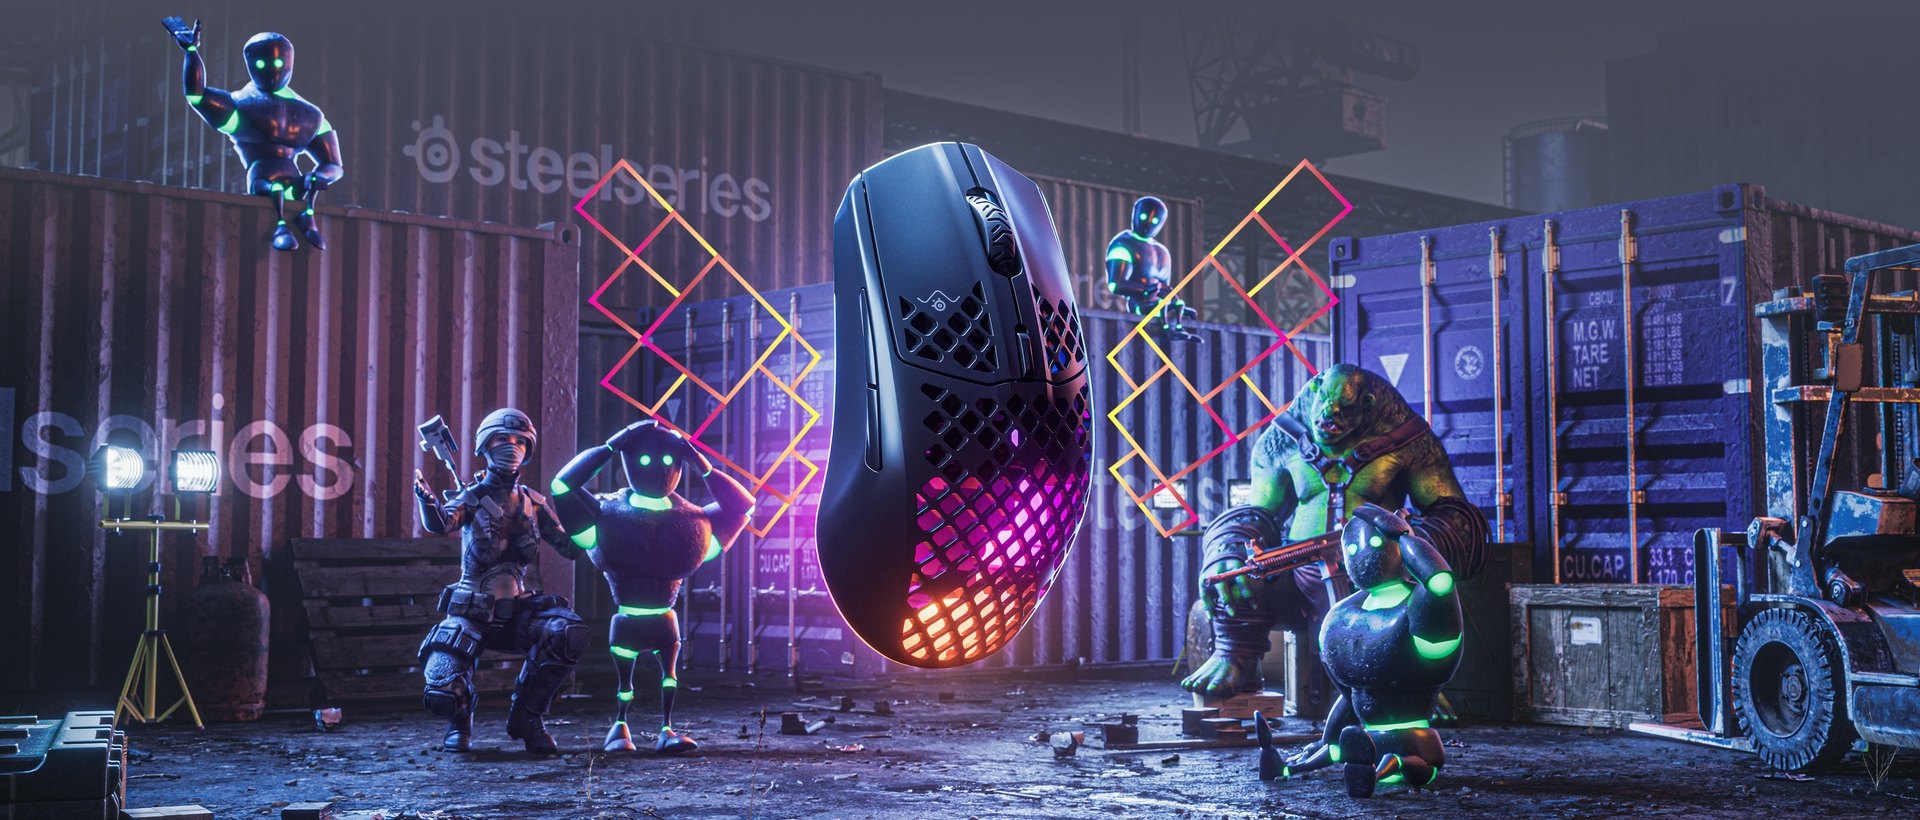 Aerox 3 Wireless 2022 mouse is floating in a shipyard full of containers that are labeled "SteelSeries". Lars the troll and a bunch of robotic figures with guns are admiring the levitating mouse.